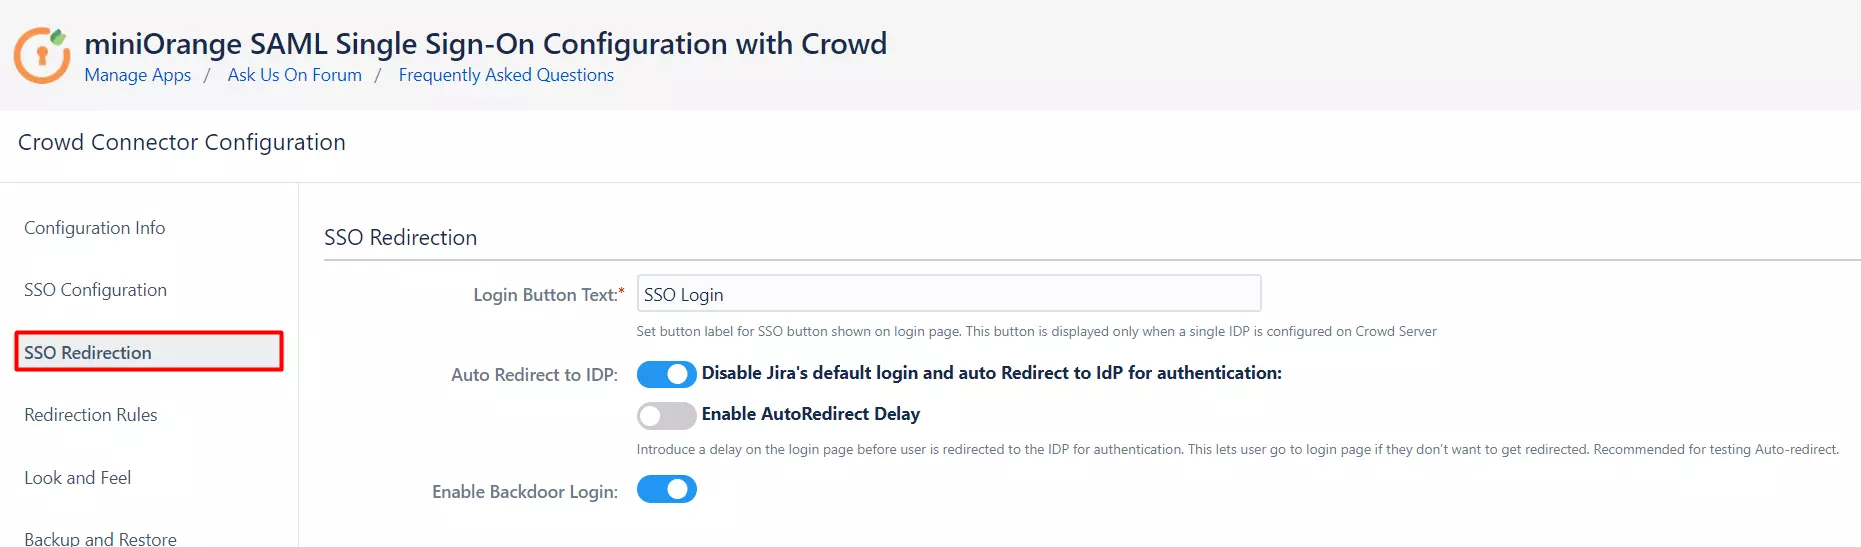 SAML Single Sign On (SSO) Connector for Crowd and Bitbucket, SSO Redirection